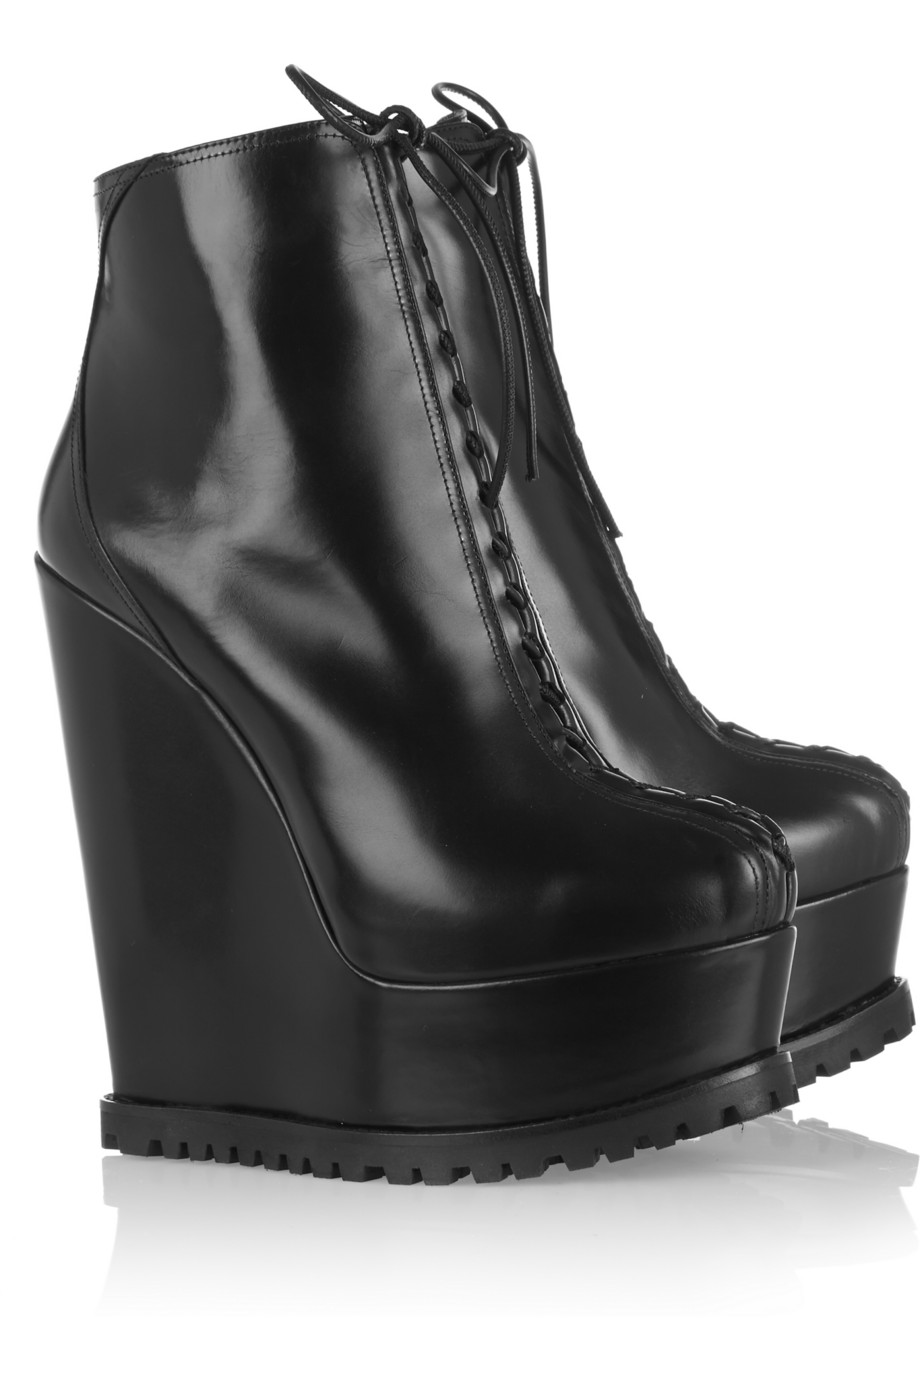 alaia-leather-wedge-ankle-boots-1